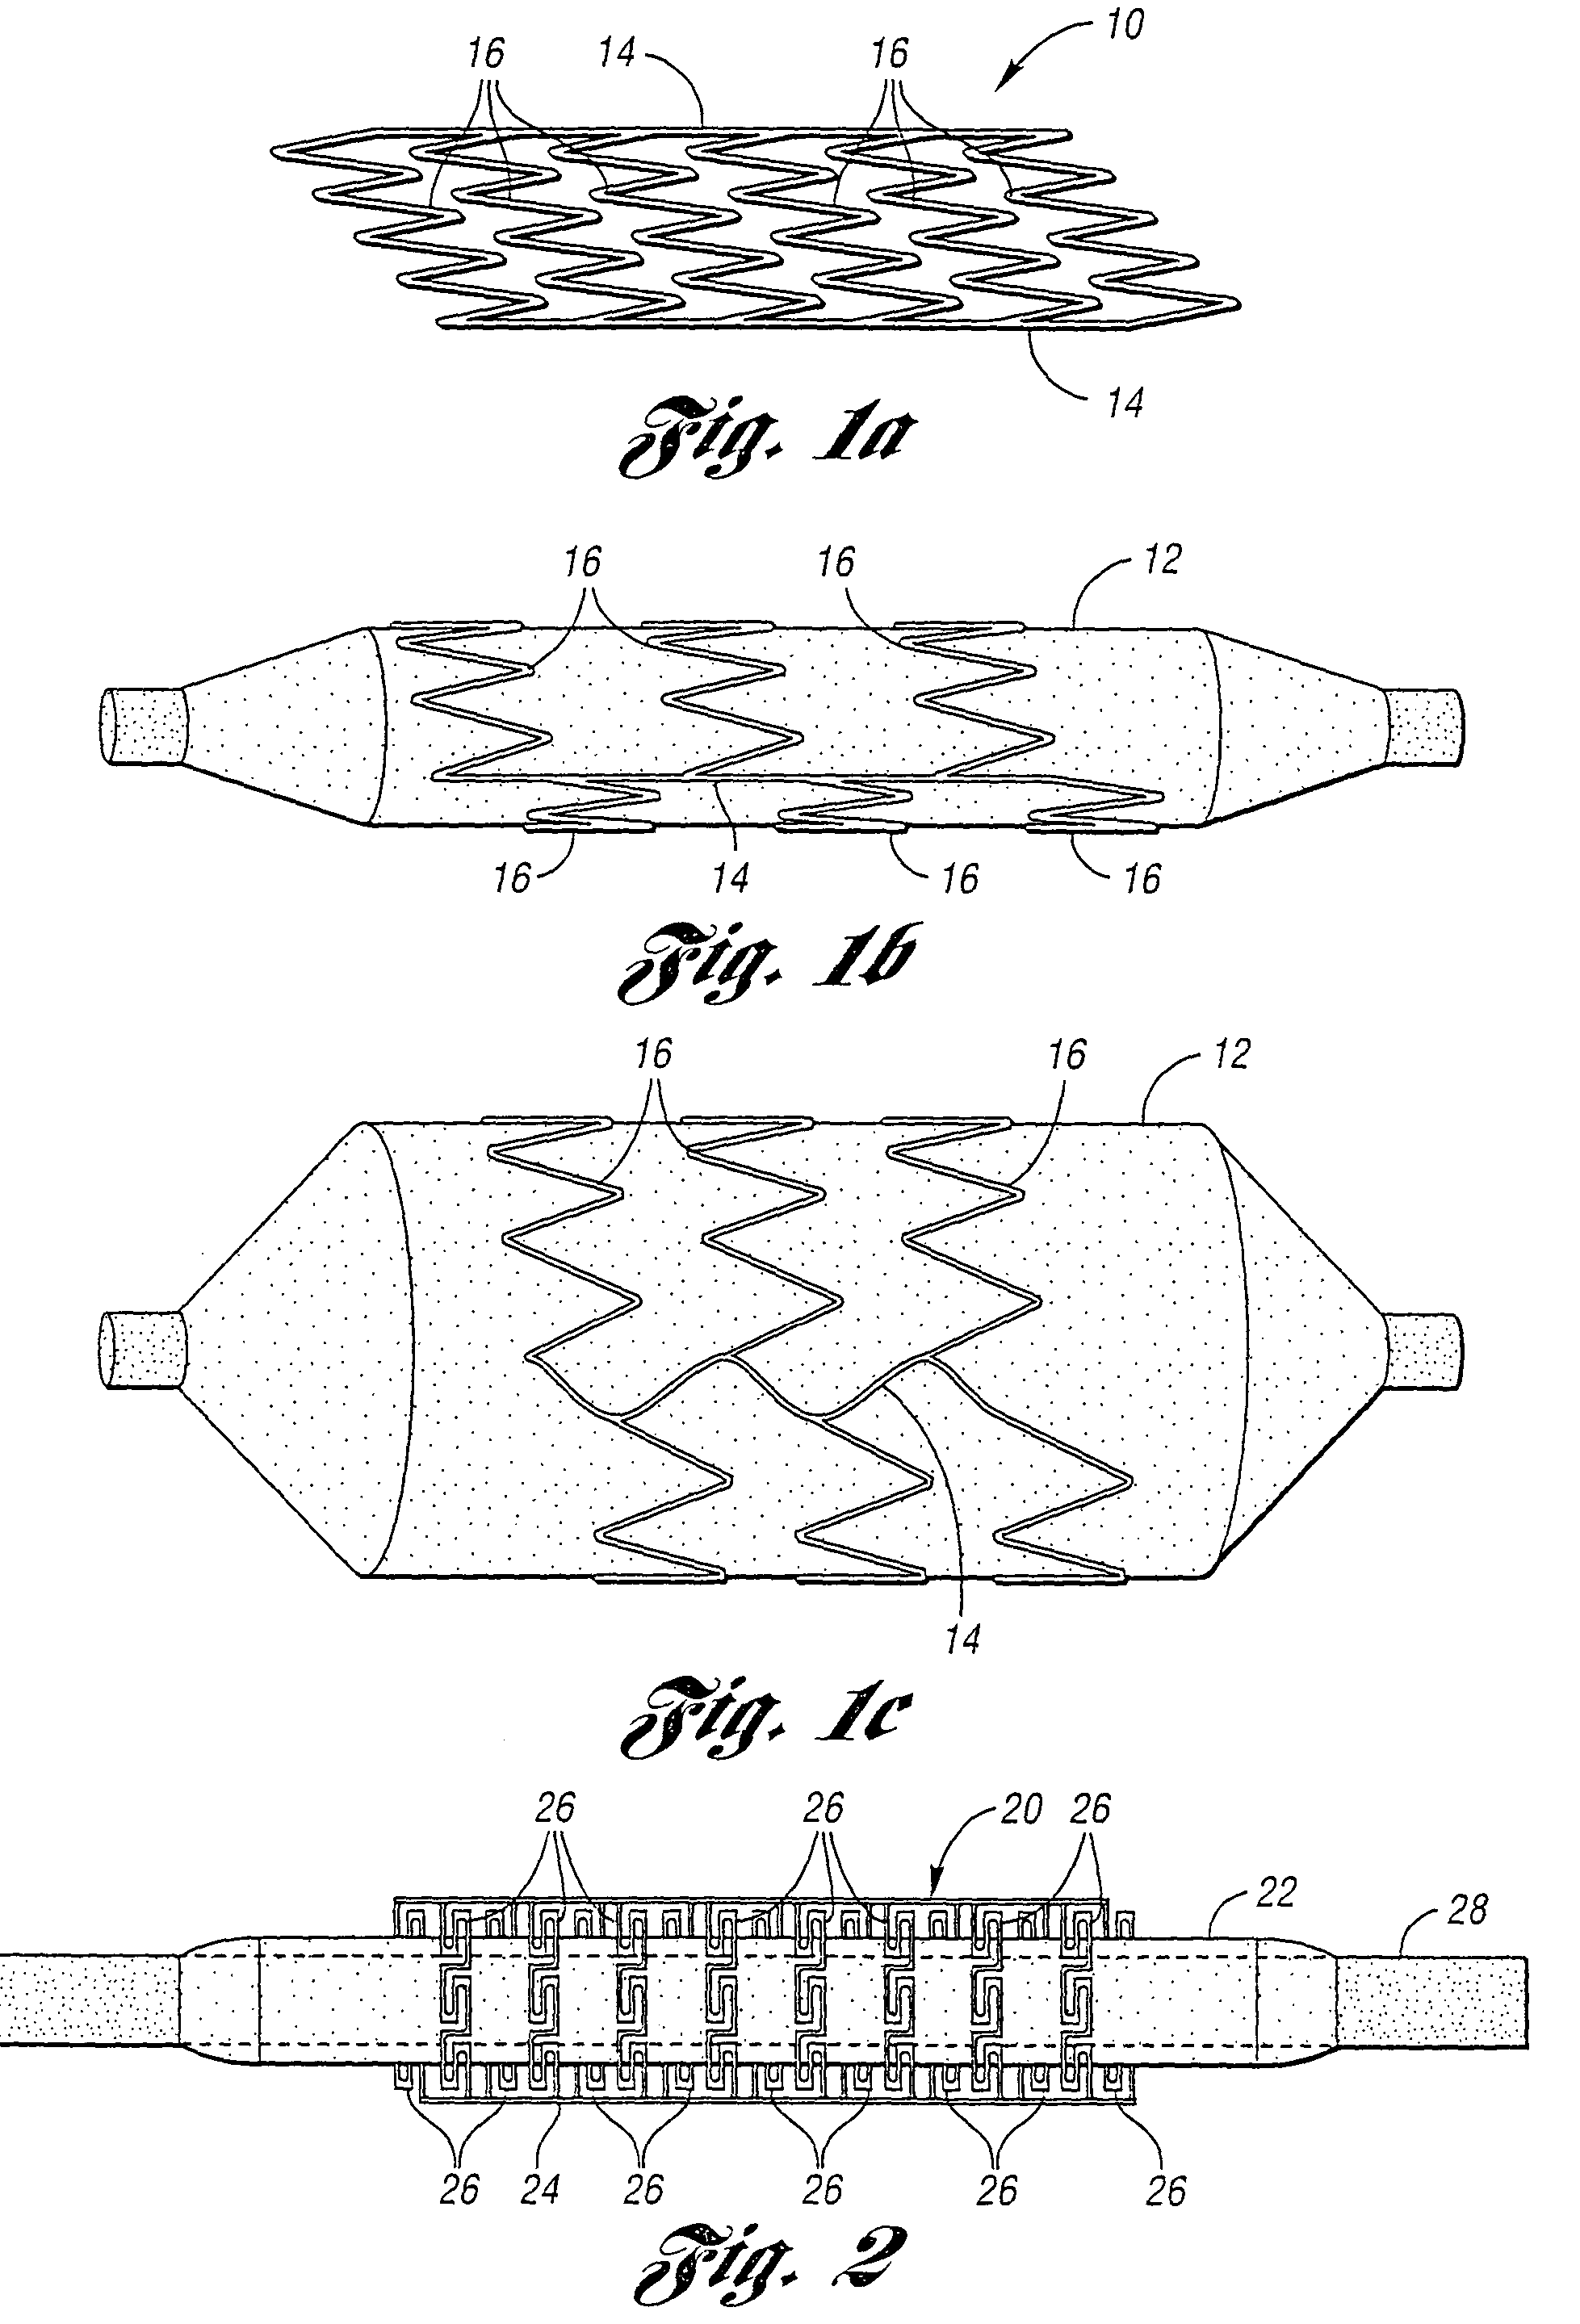 Assembly and planar structure for use therein which is expandable into a 3-D structure such as a stent and device for making the planar structure